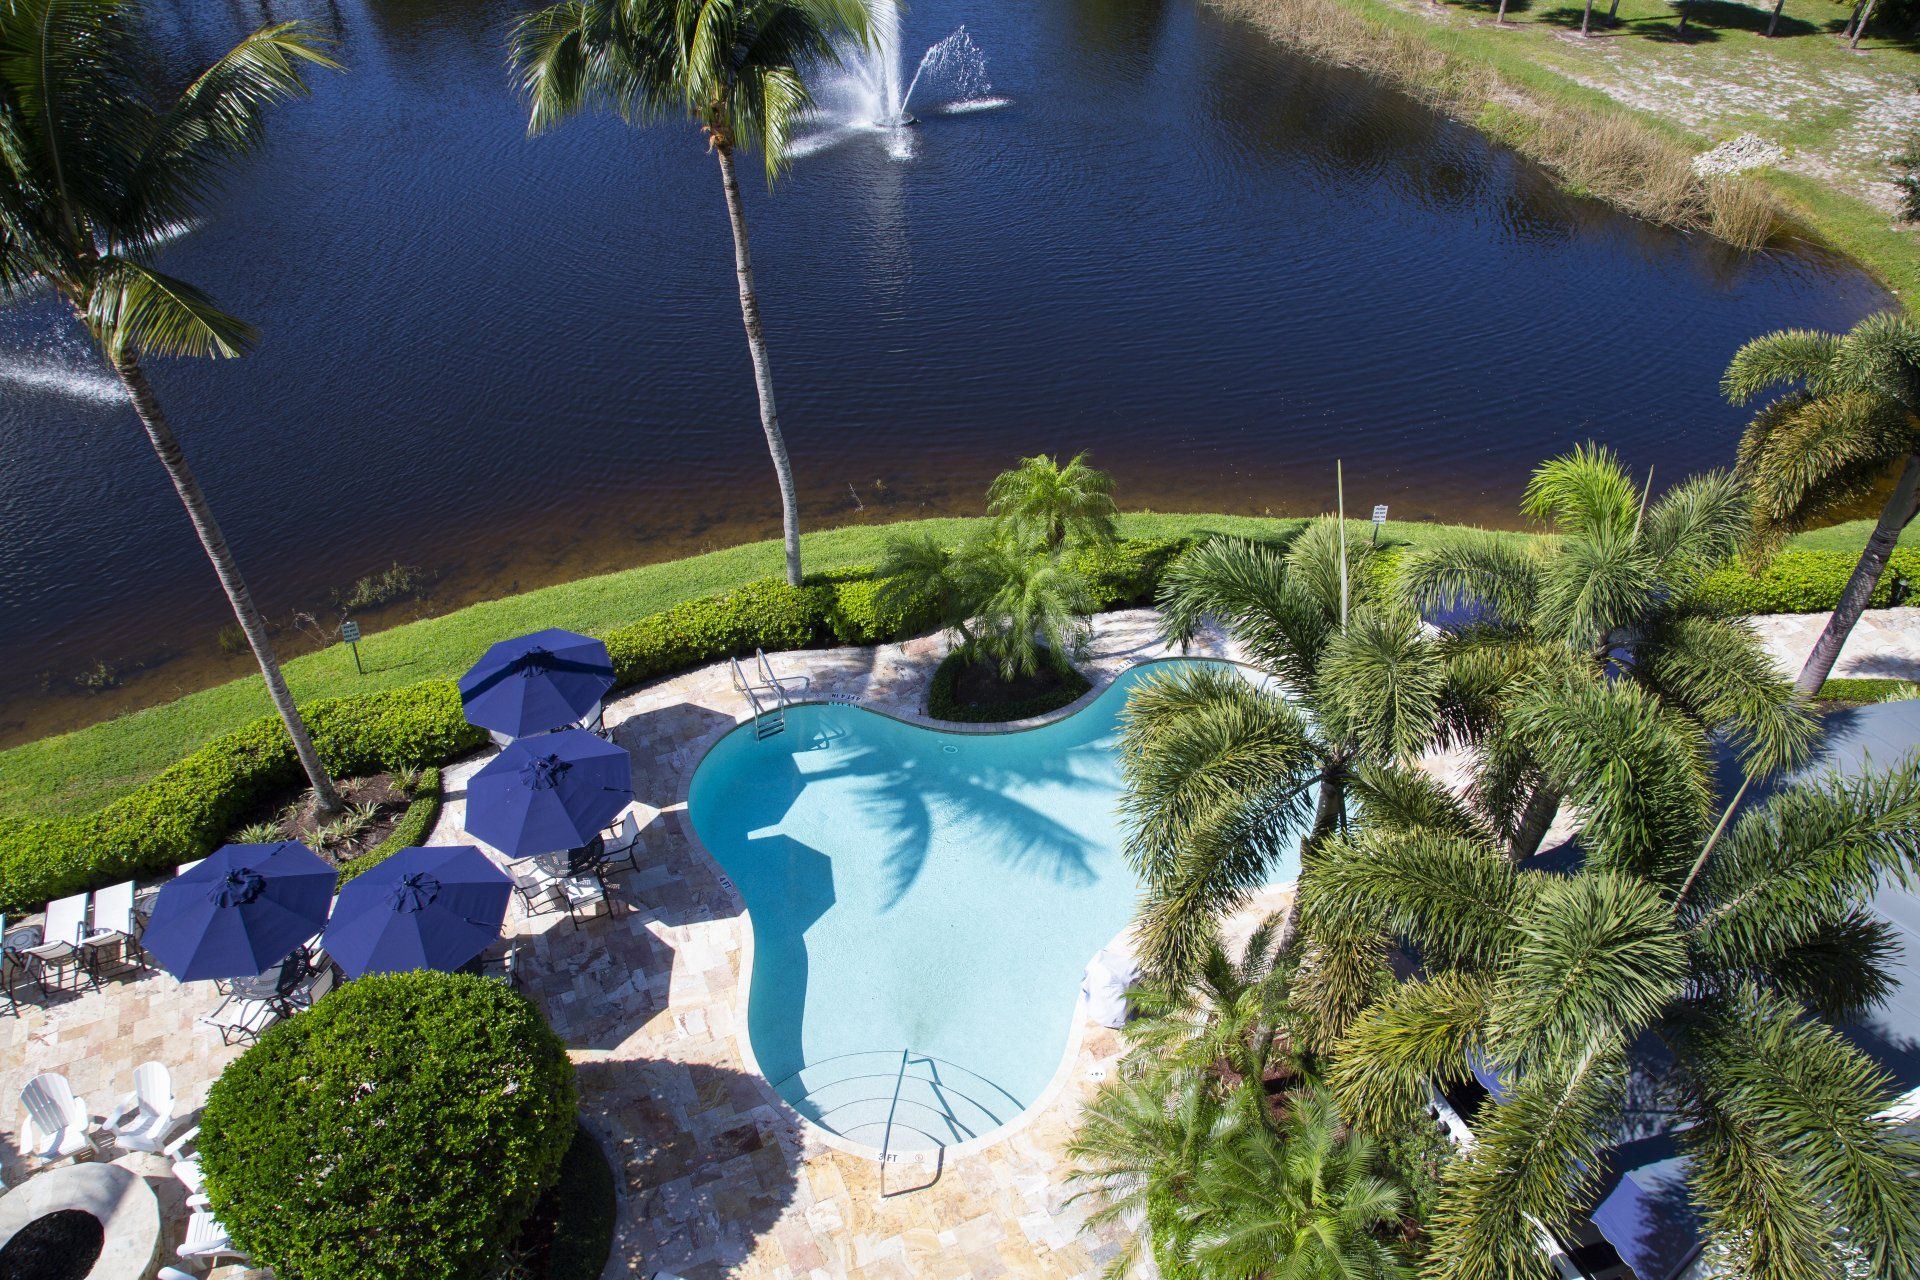 An aerial view of a swimming pool surrounded by palm trees and umbrellas